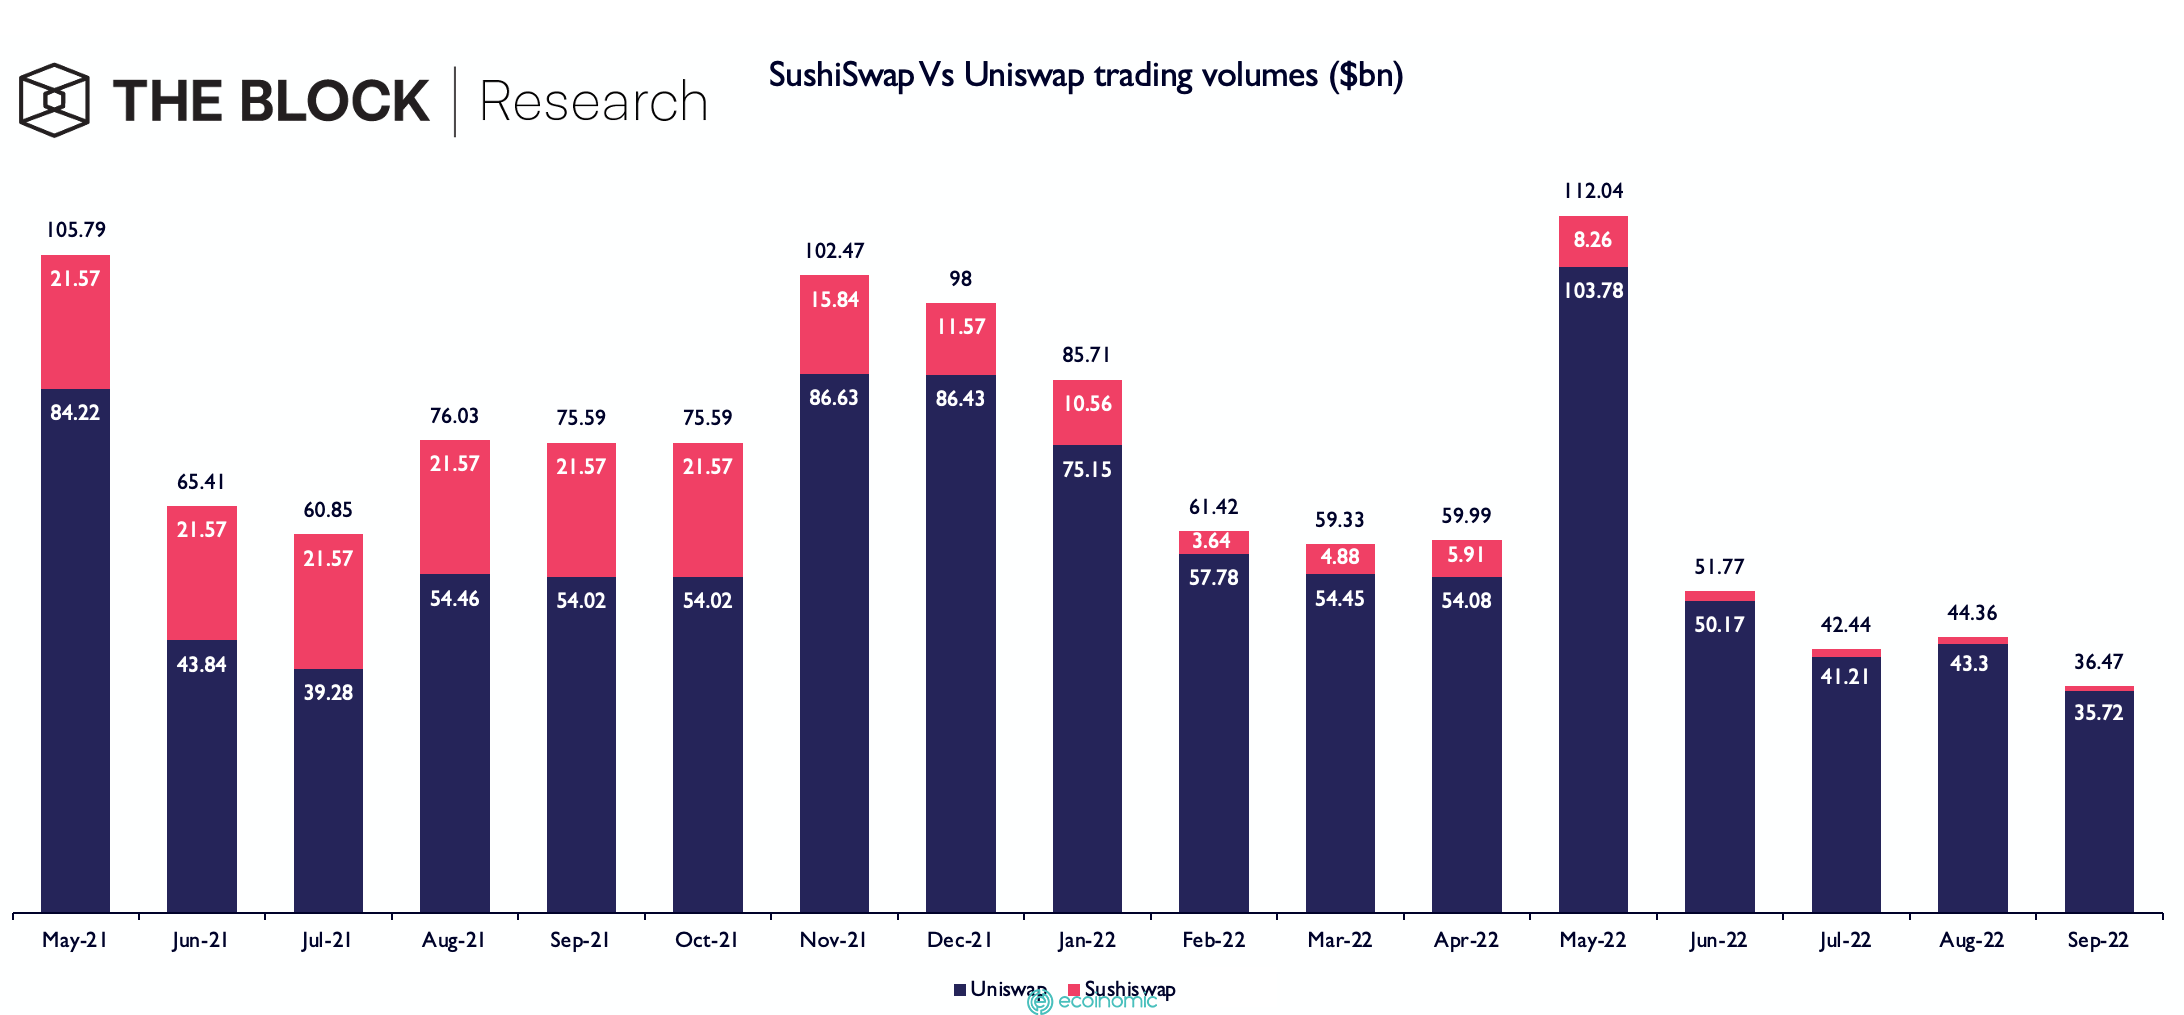 A chart showing Uniswap and SushiSwap trading volumes.